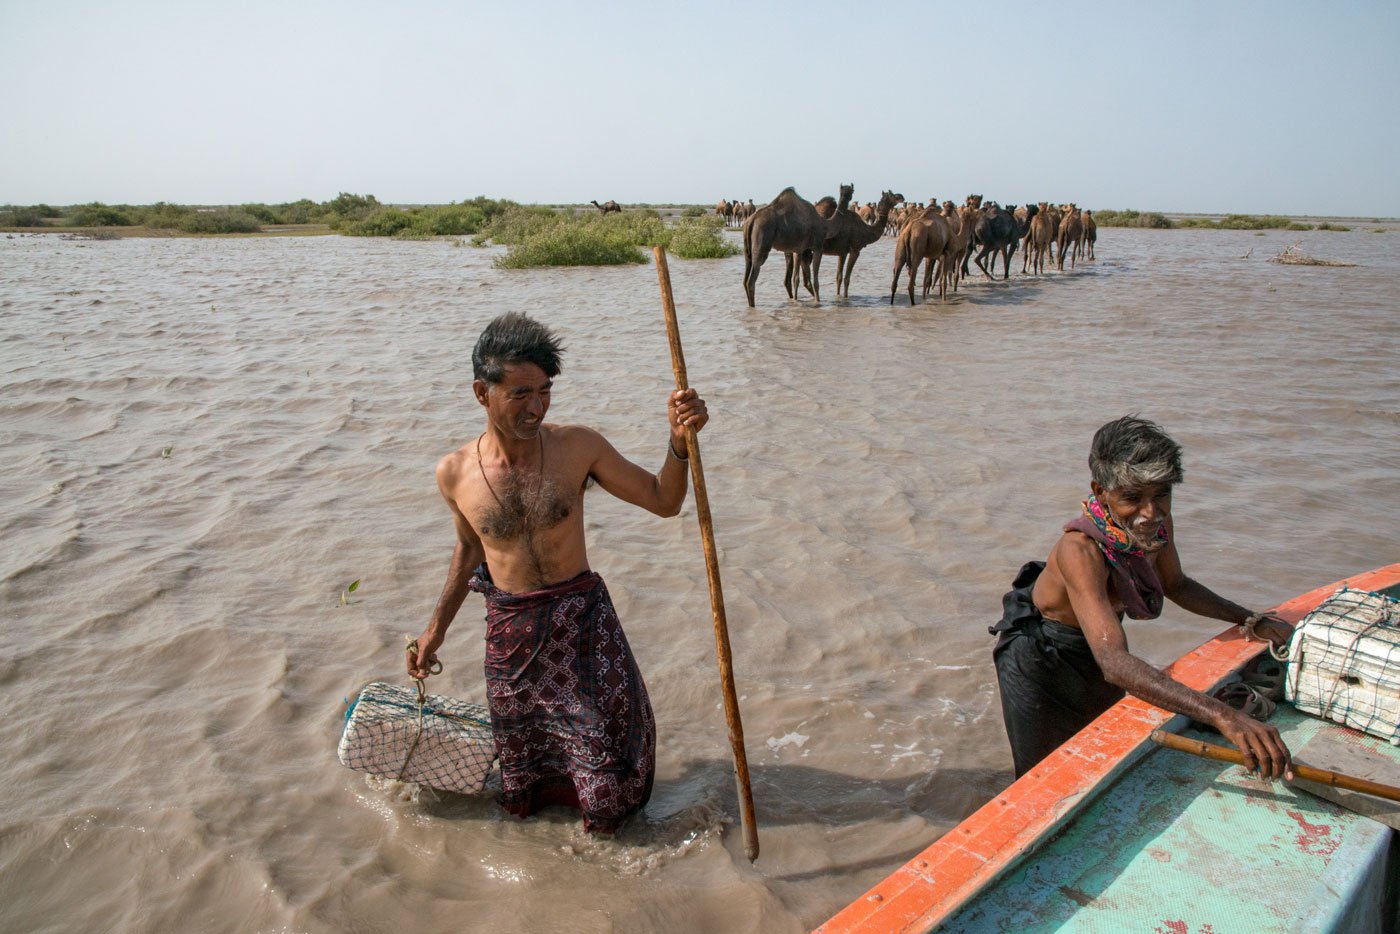 Aadam Jat (left) and a fellow herder getting on the boat to return to their village after the camels have left the shore with another herder